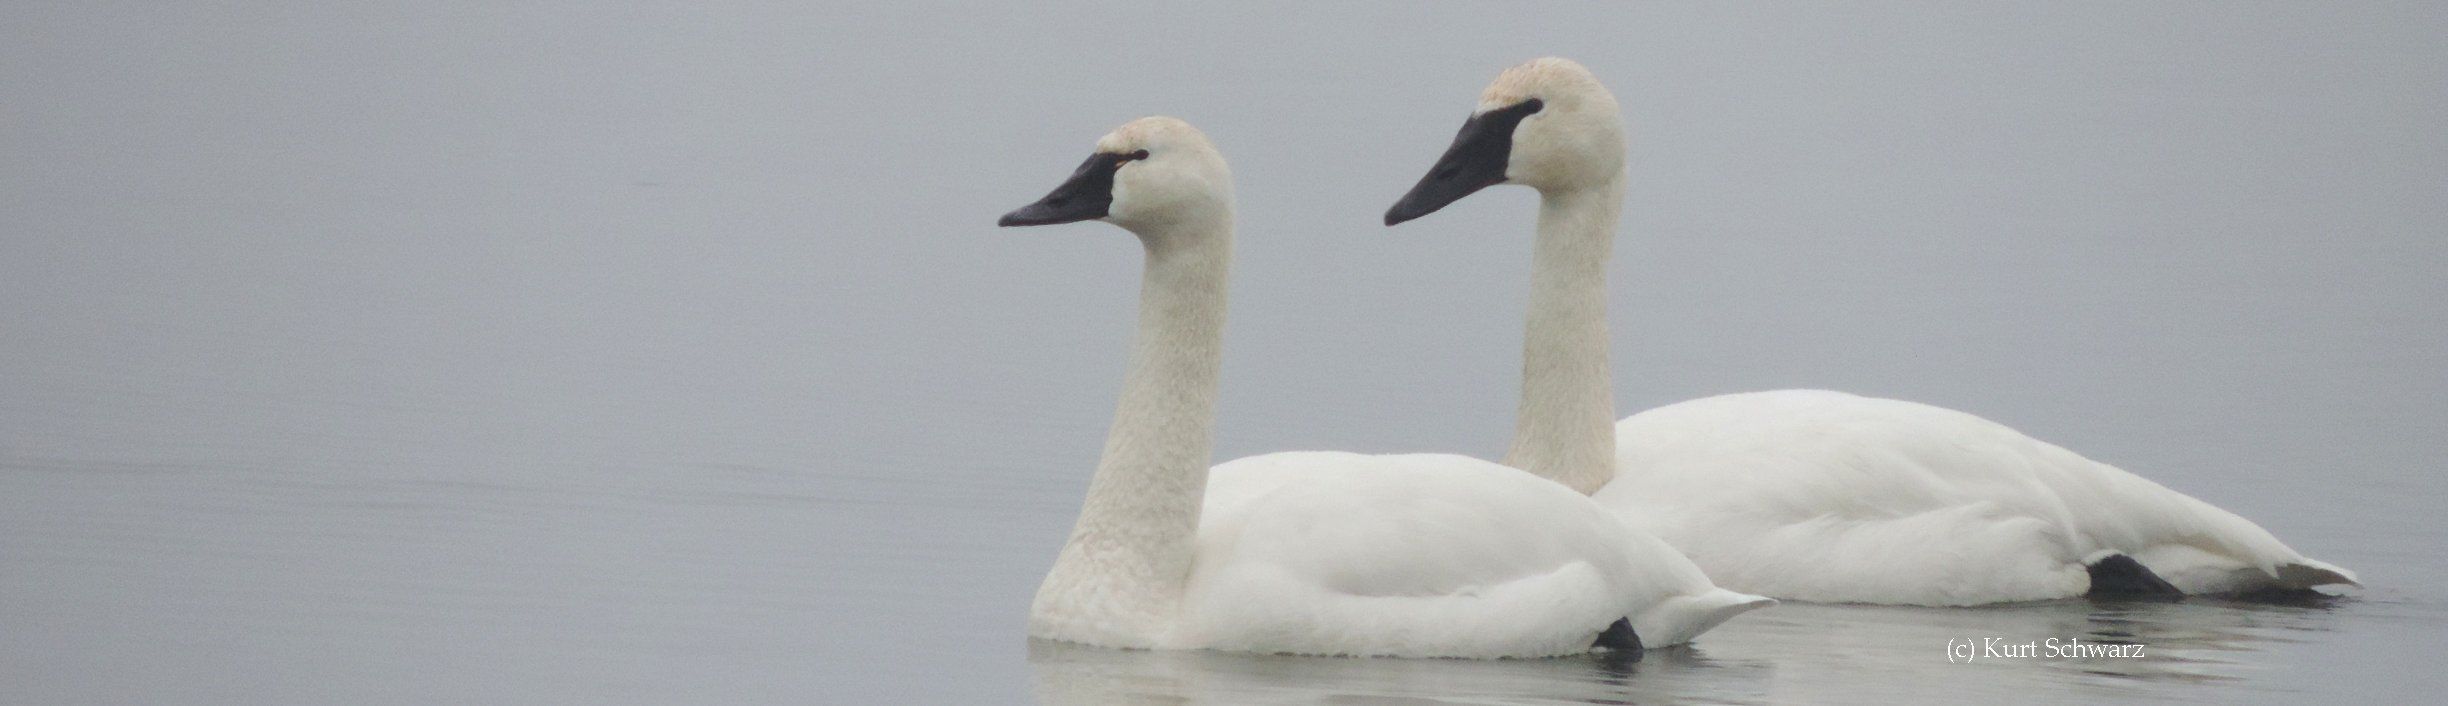 Head and bill shapes can help identify swan species including Trumpeter Swans, Tundra Swans and Mute Swans